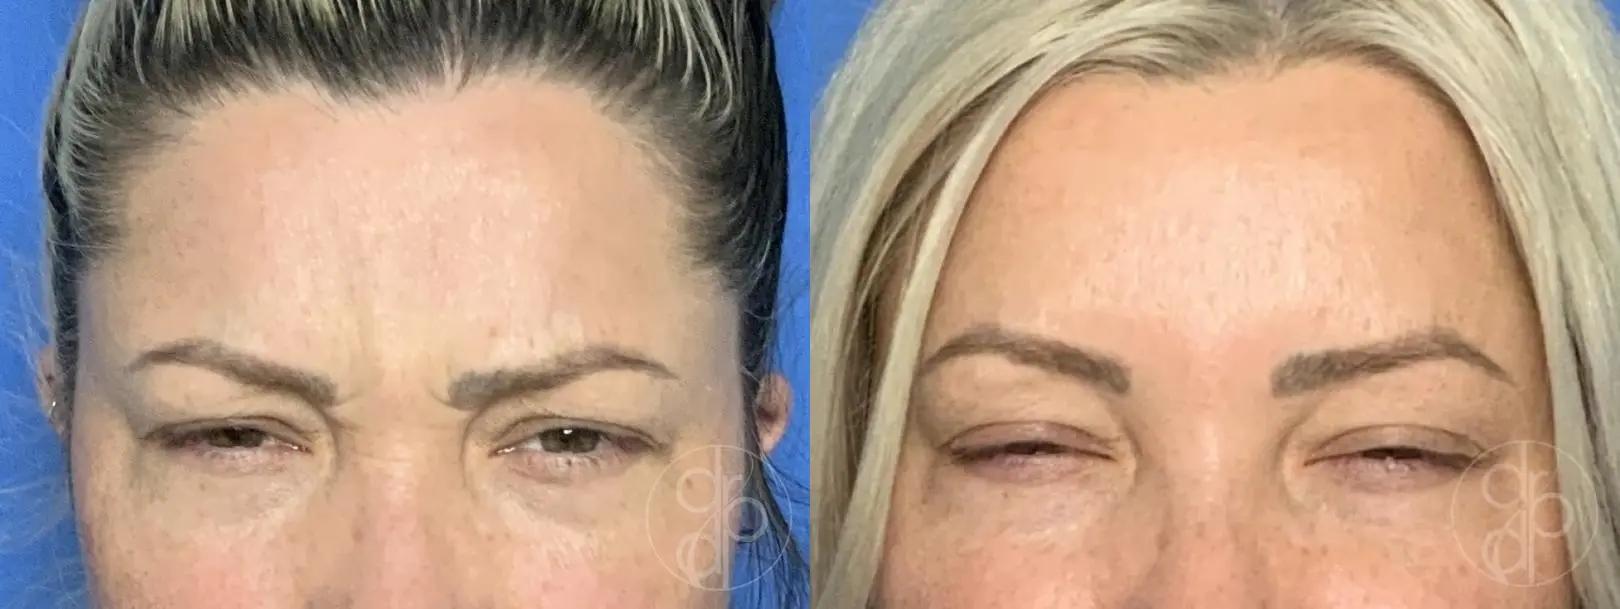 patient 13983 injectables before and after result - Before and After 3